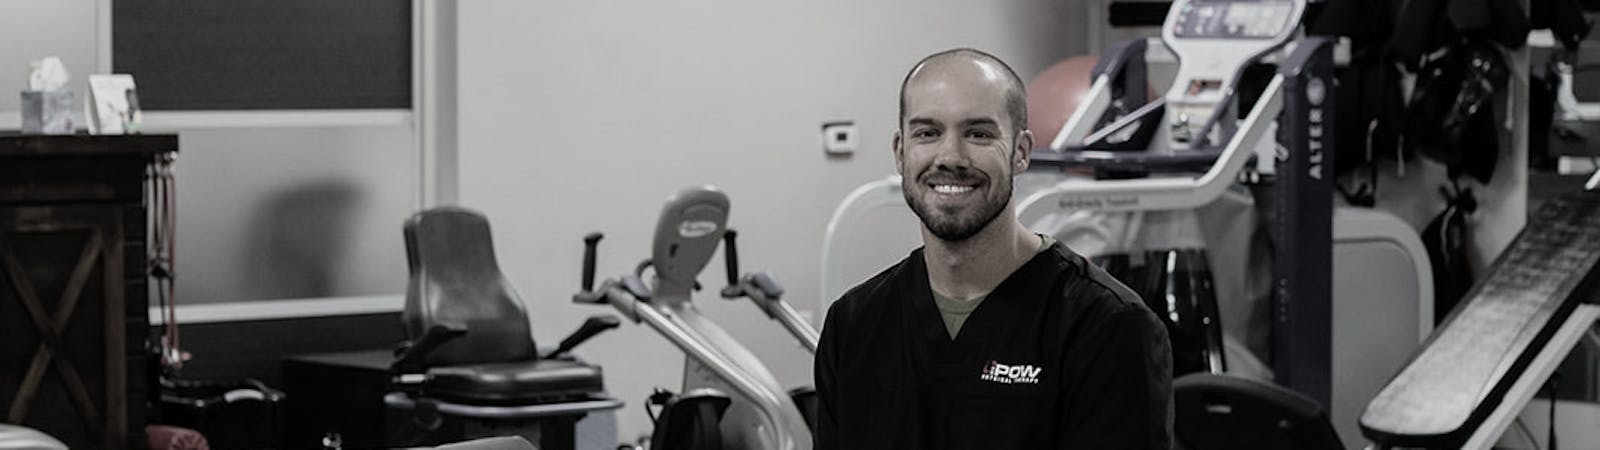 iPOW Physical Therapy & Wellness